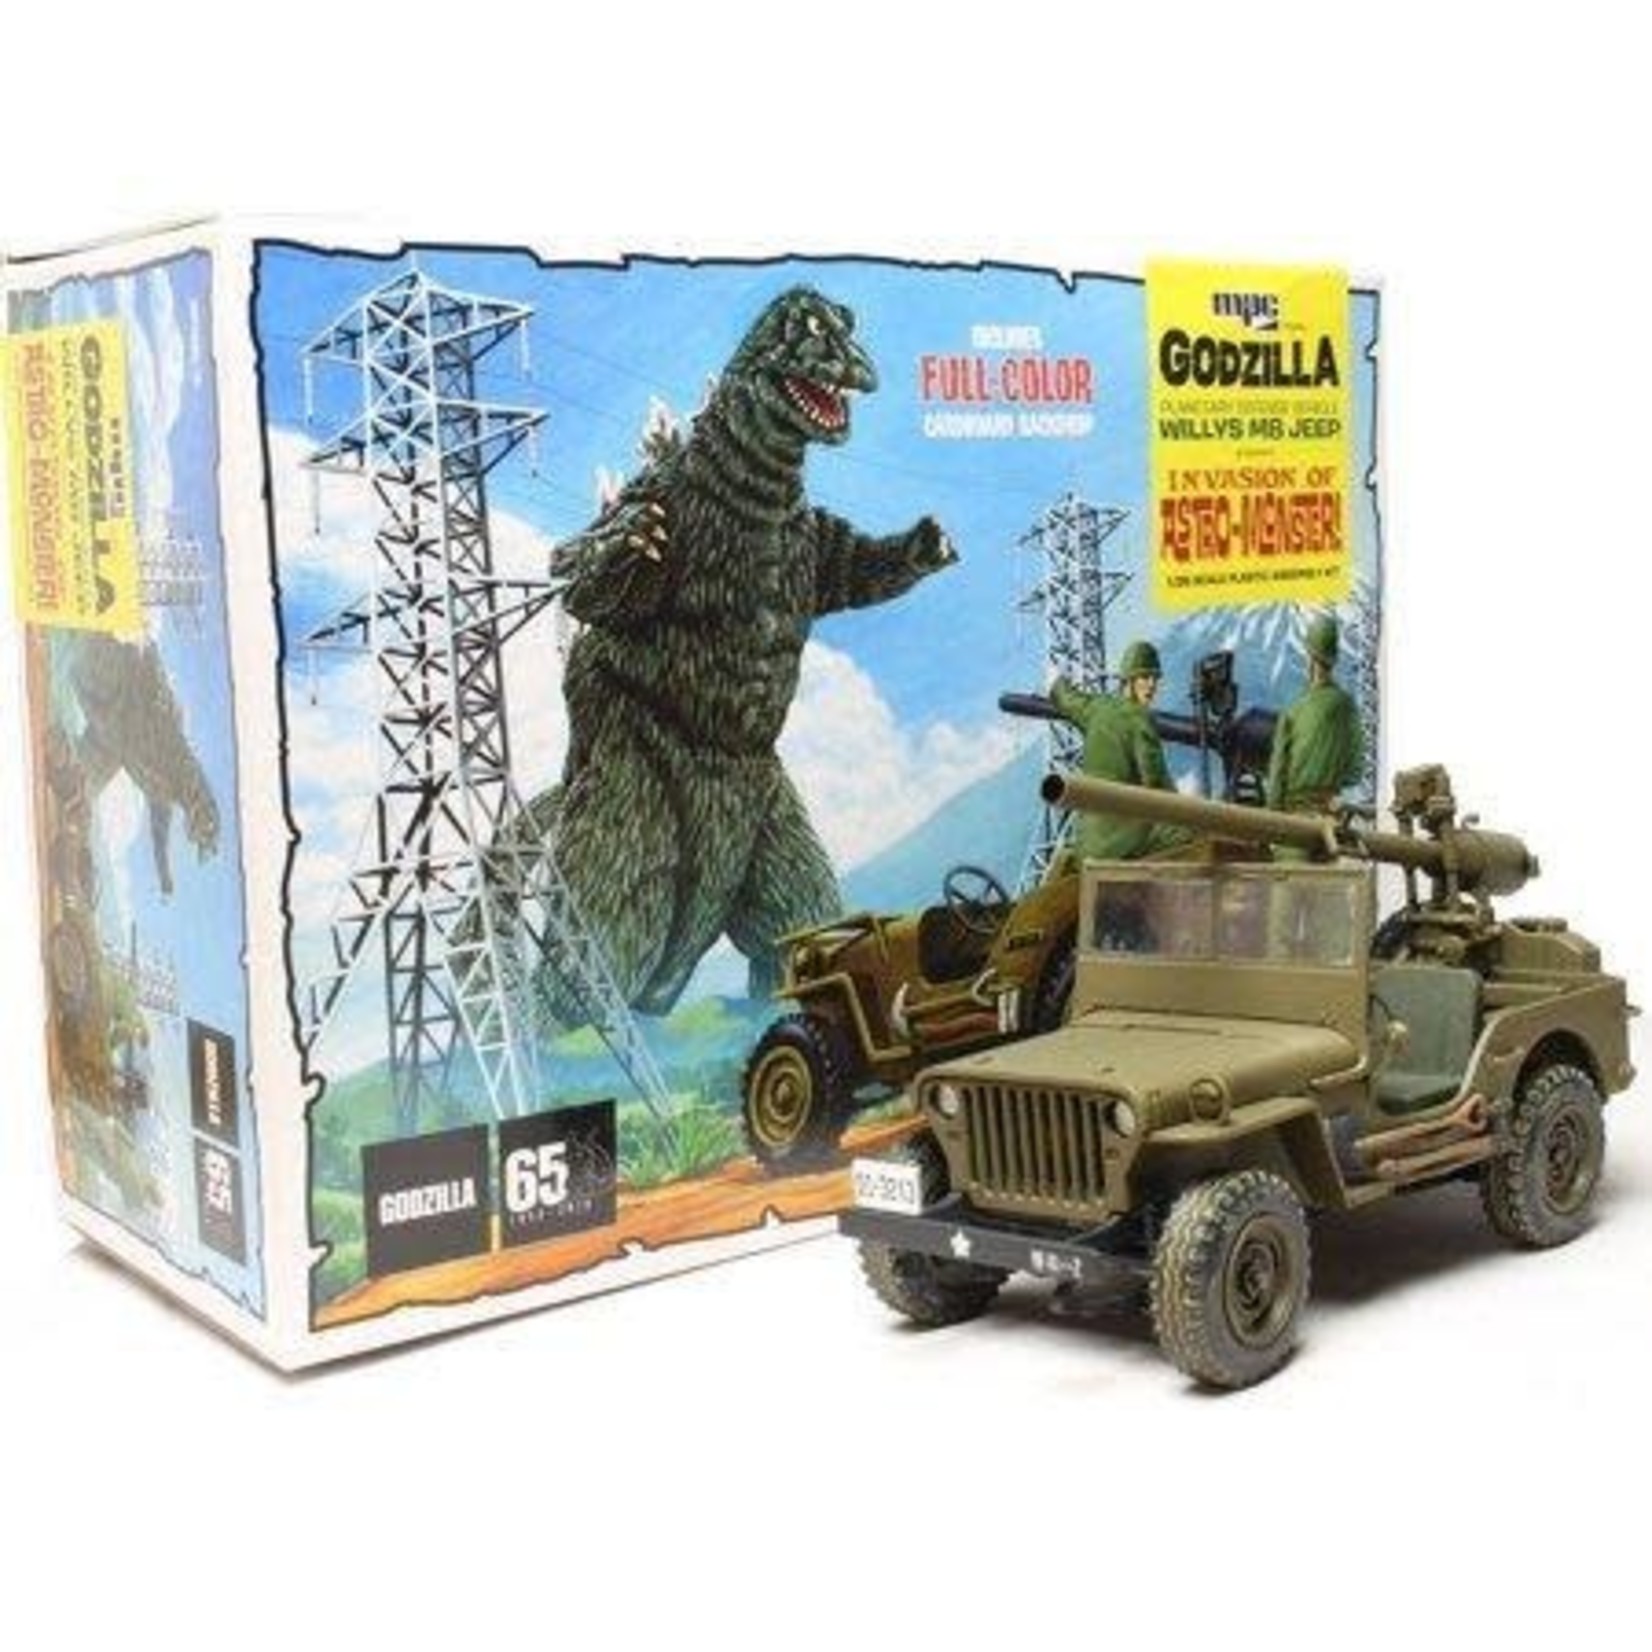 MPC GODZILLA 1/25 GODZILLA AND WILLYS MB JEEP WITH FULL-COLOR BACKDROP PLASTIC ASSEMBLY KIT